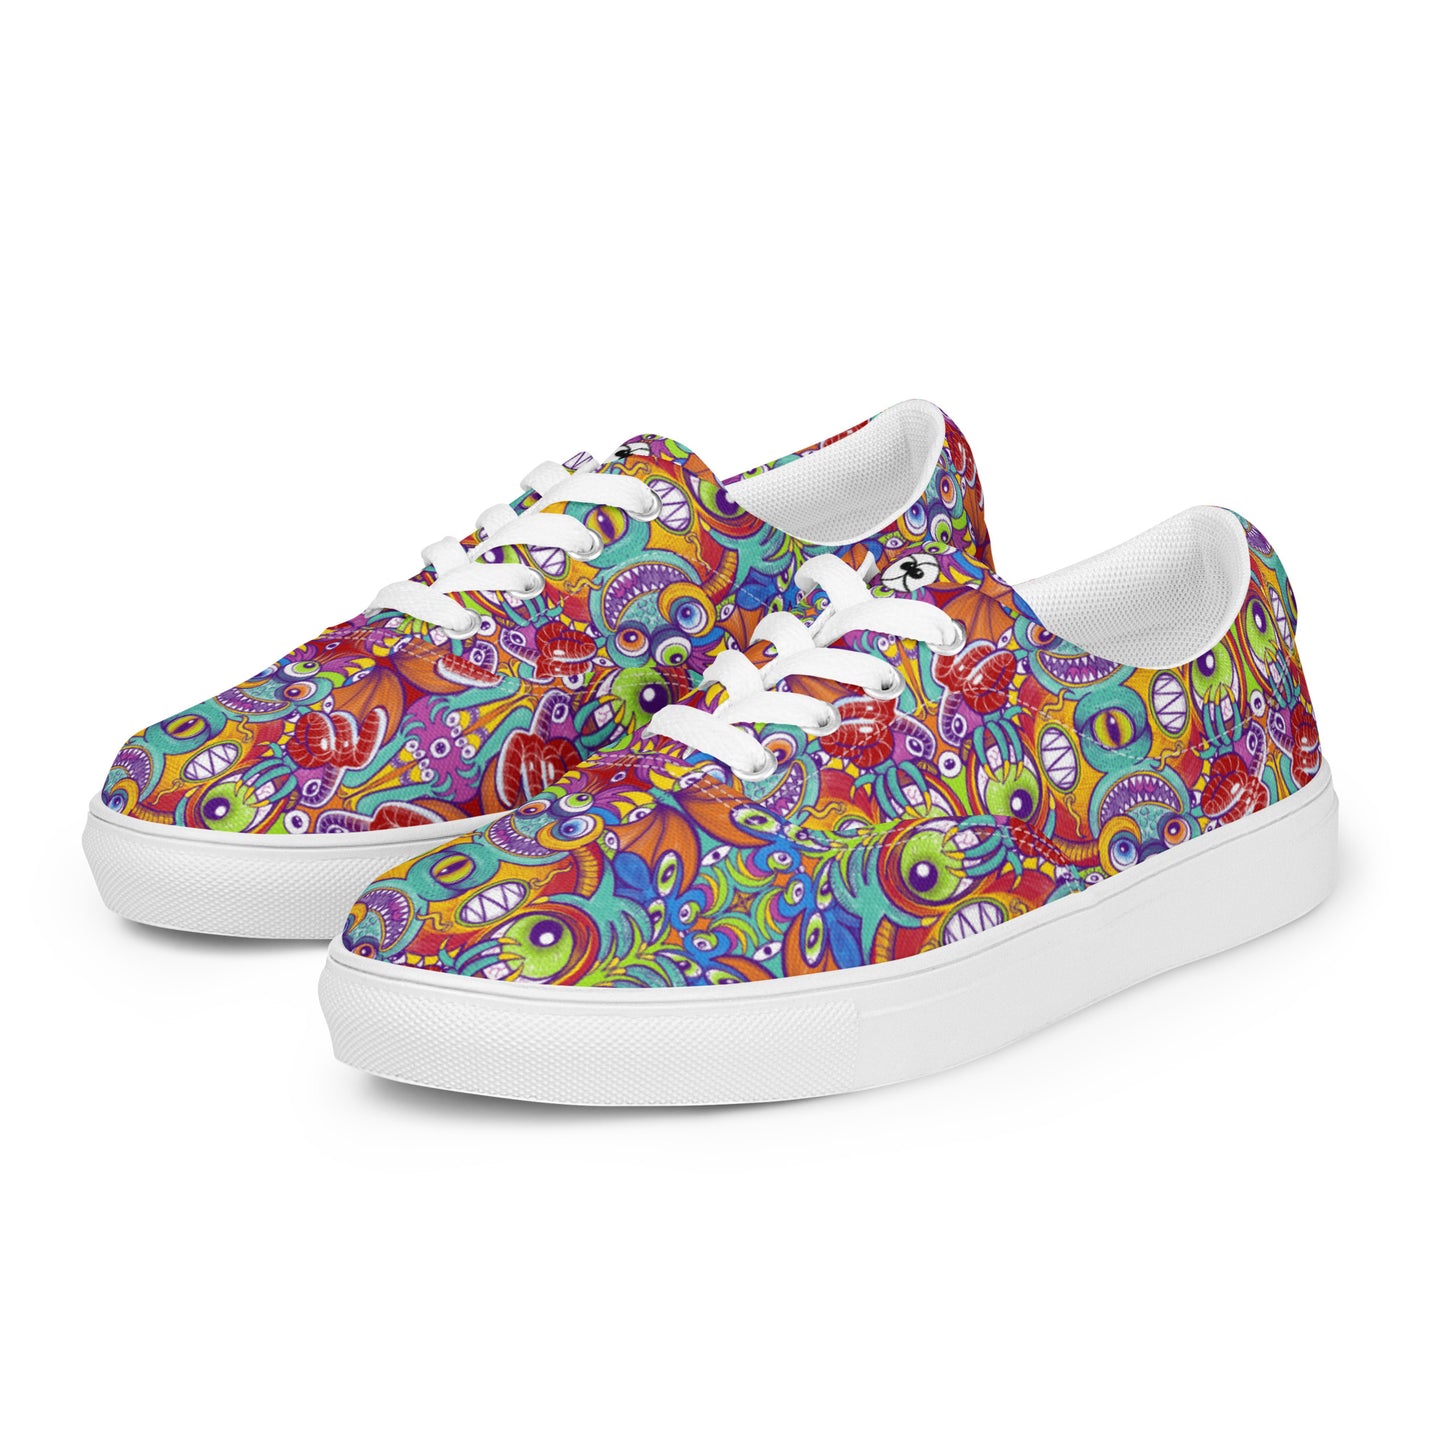 Psychedelic monsters having fun pattern design Men’s lace-up canvas shoes. Overview